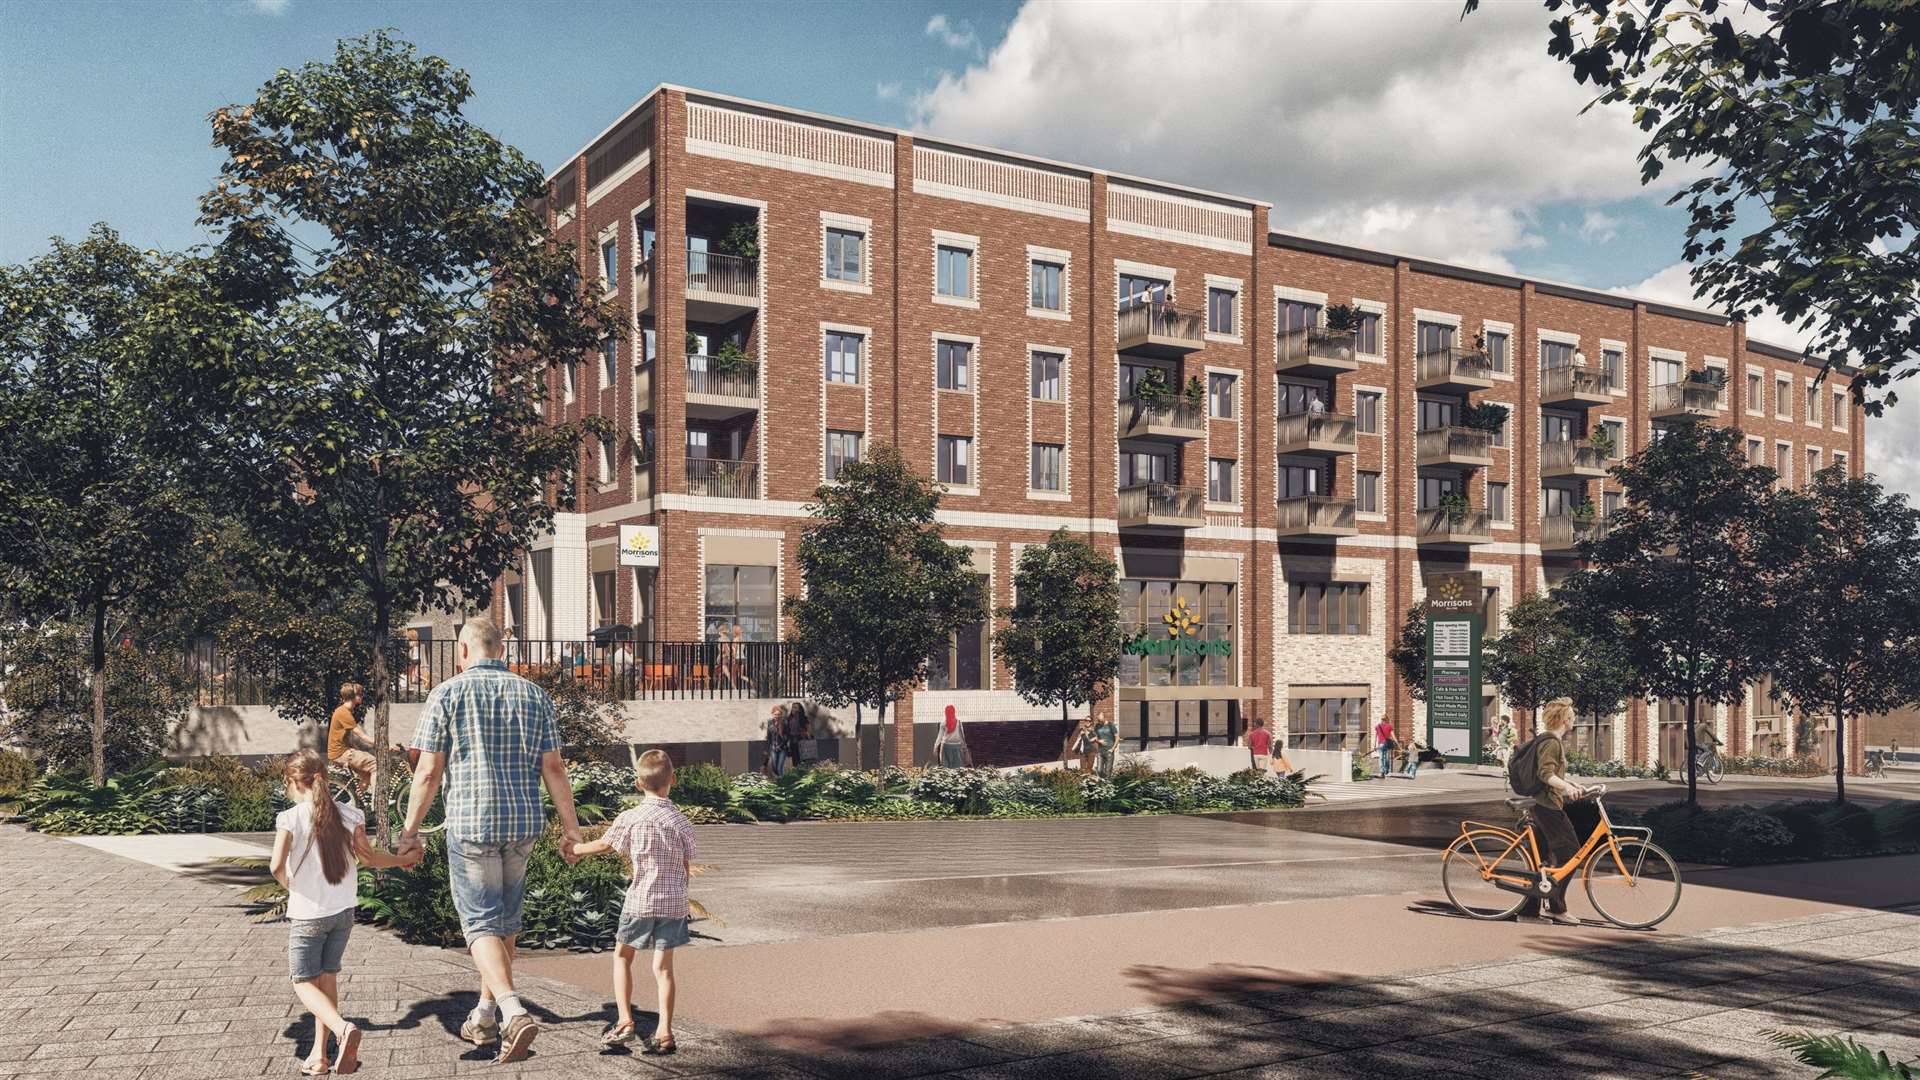 Henley Developments has been granted permission for a Morrisons supermarket, a gym, nursery and 83 homes at the Alkerden Village in Ebbsfleet Garden City. Picture: Henley